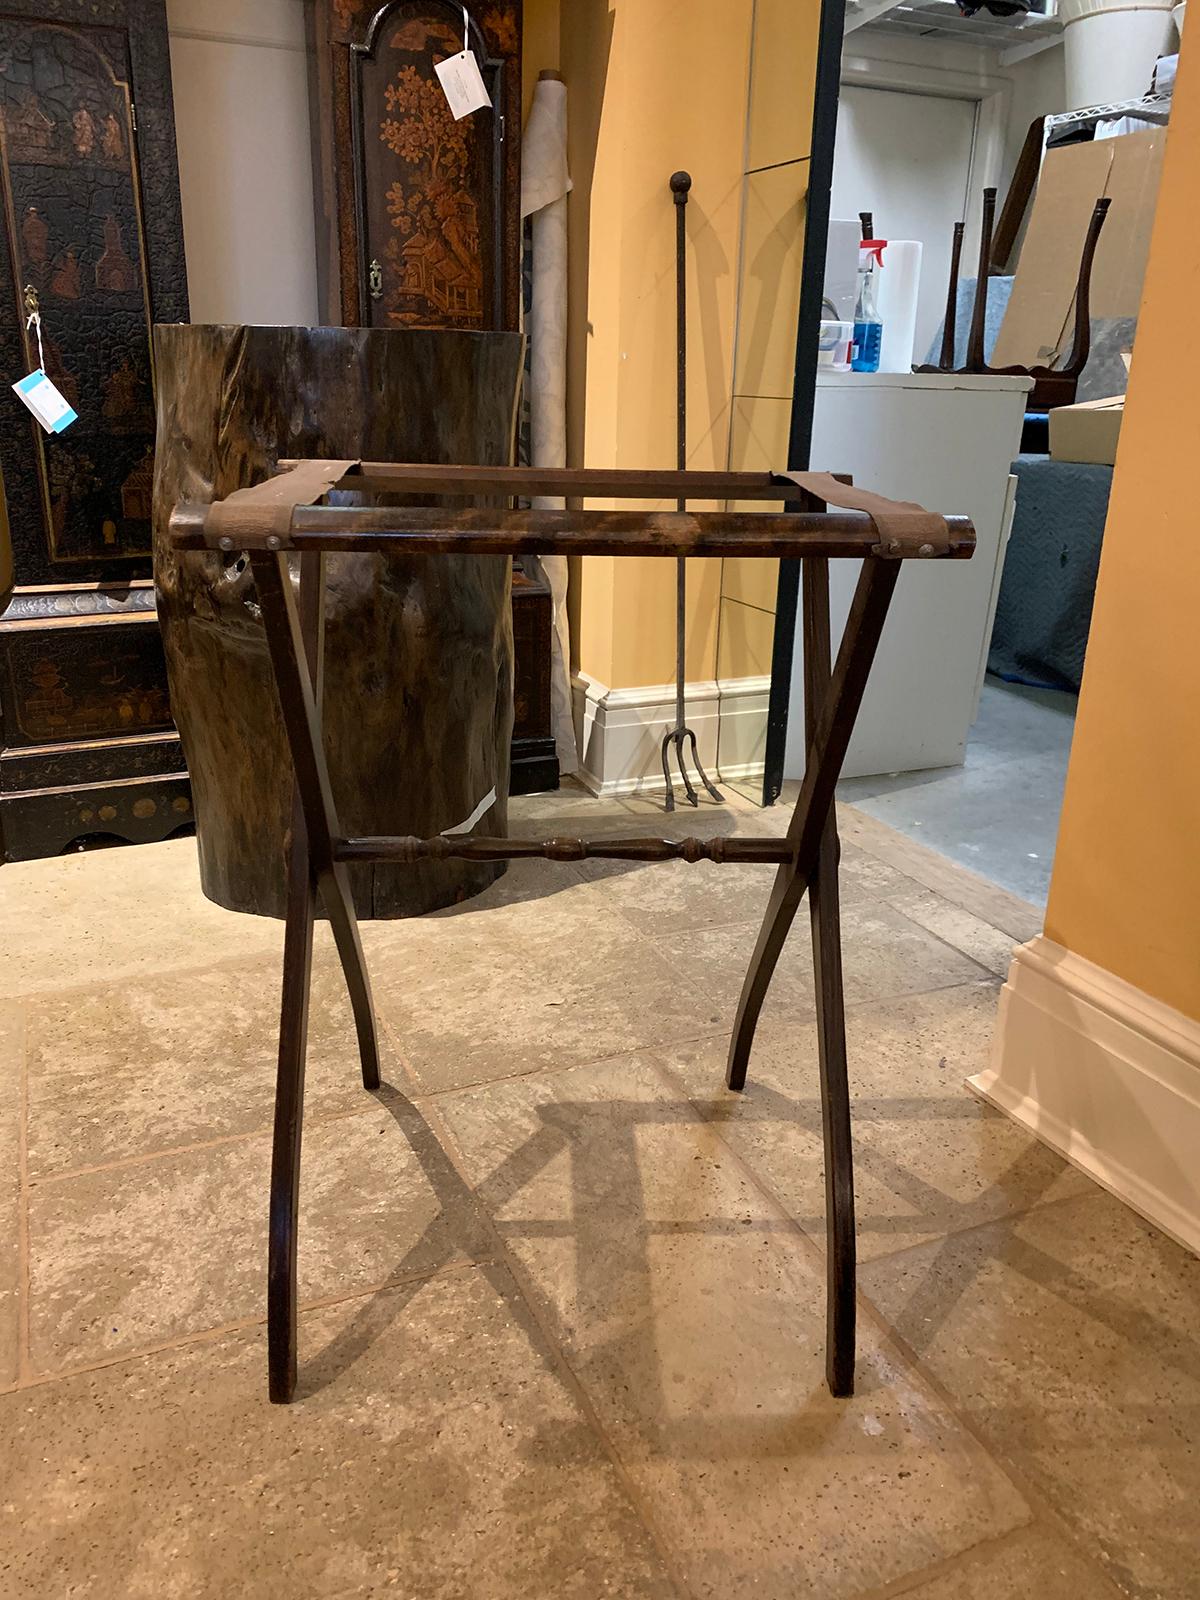 19th-20th century wooden folding tray stand.